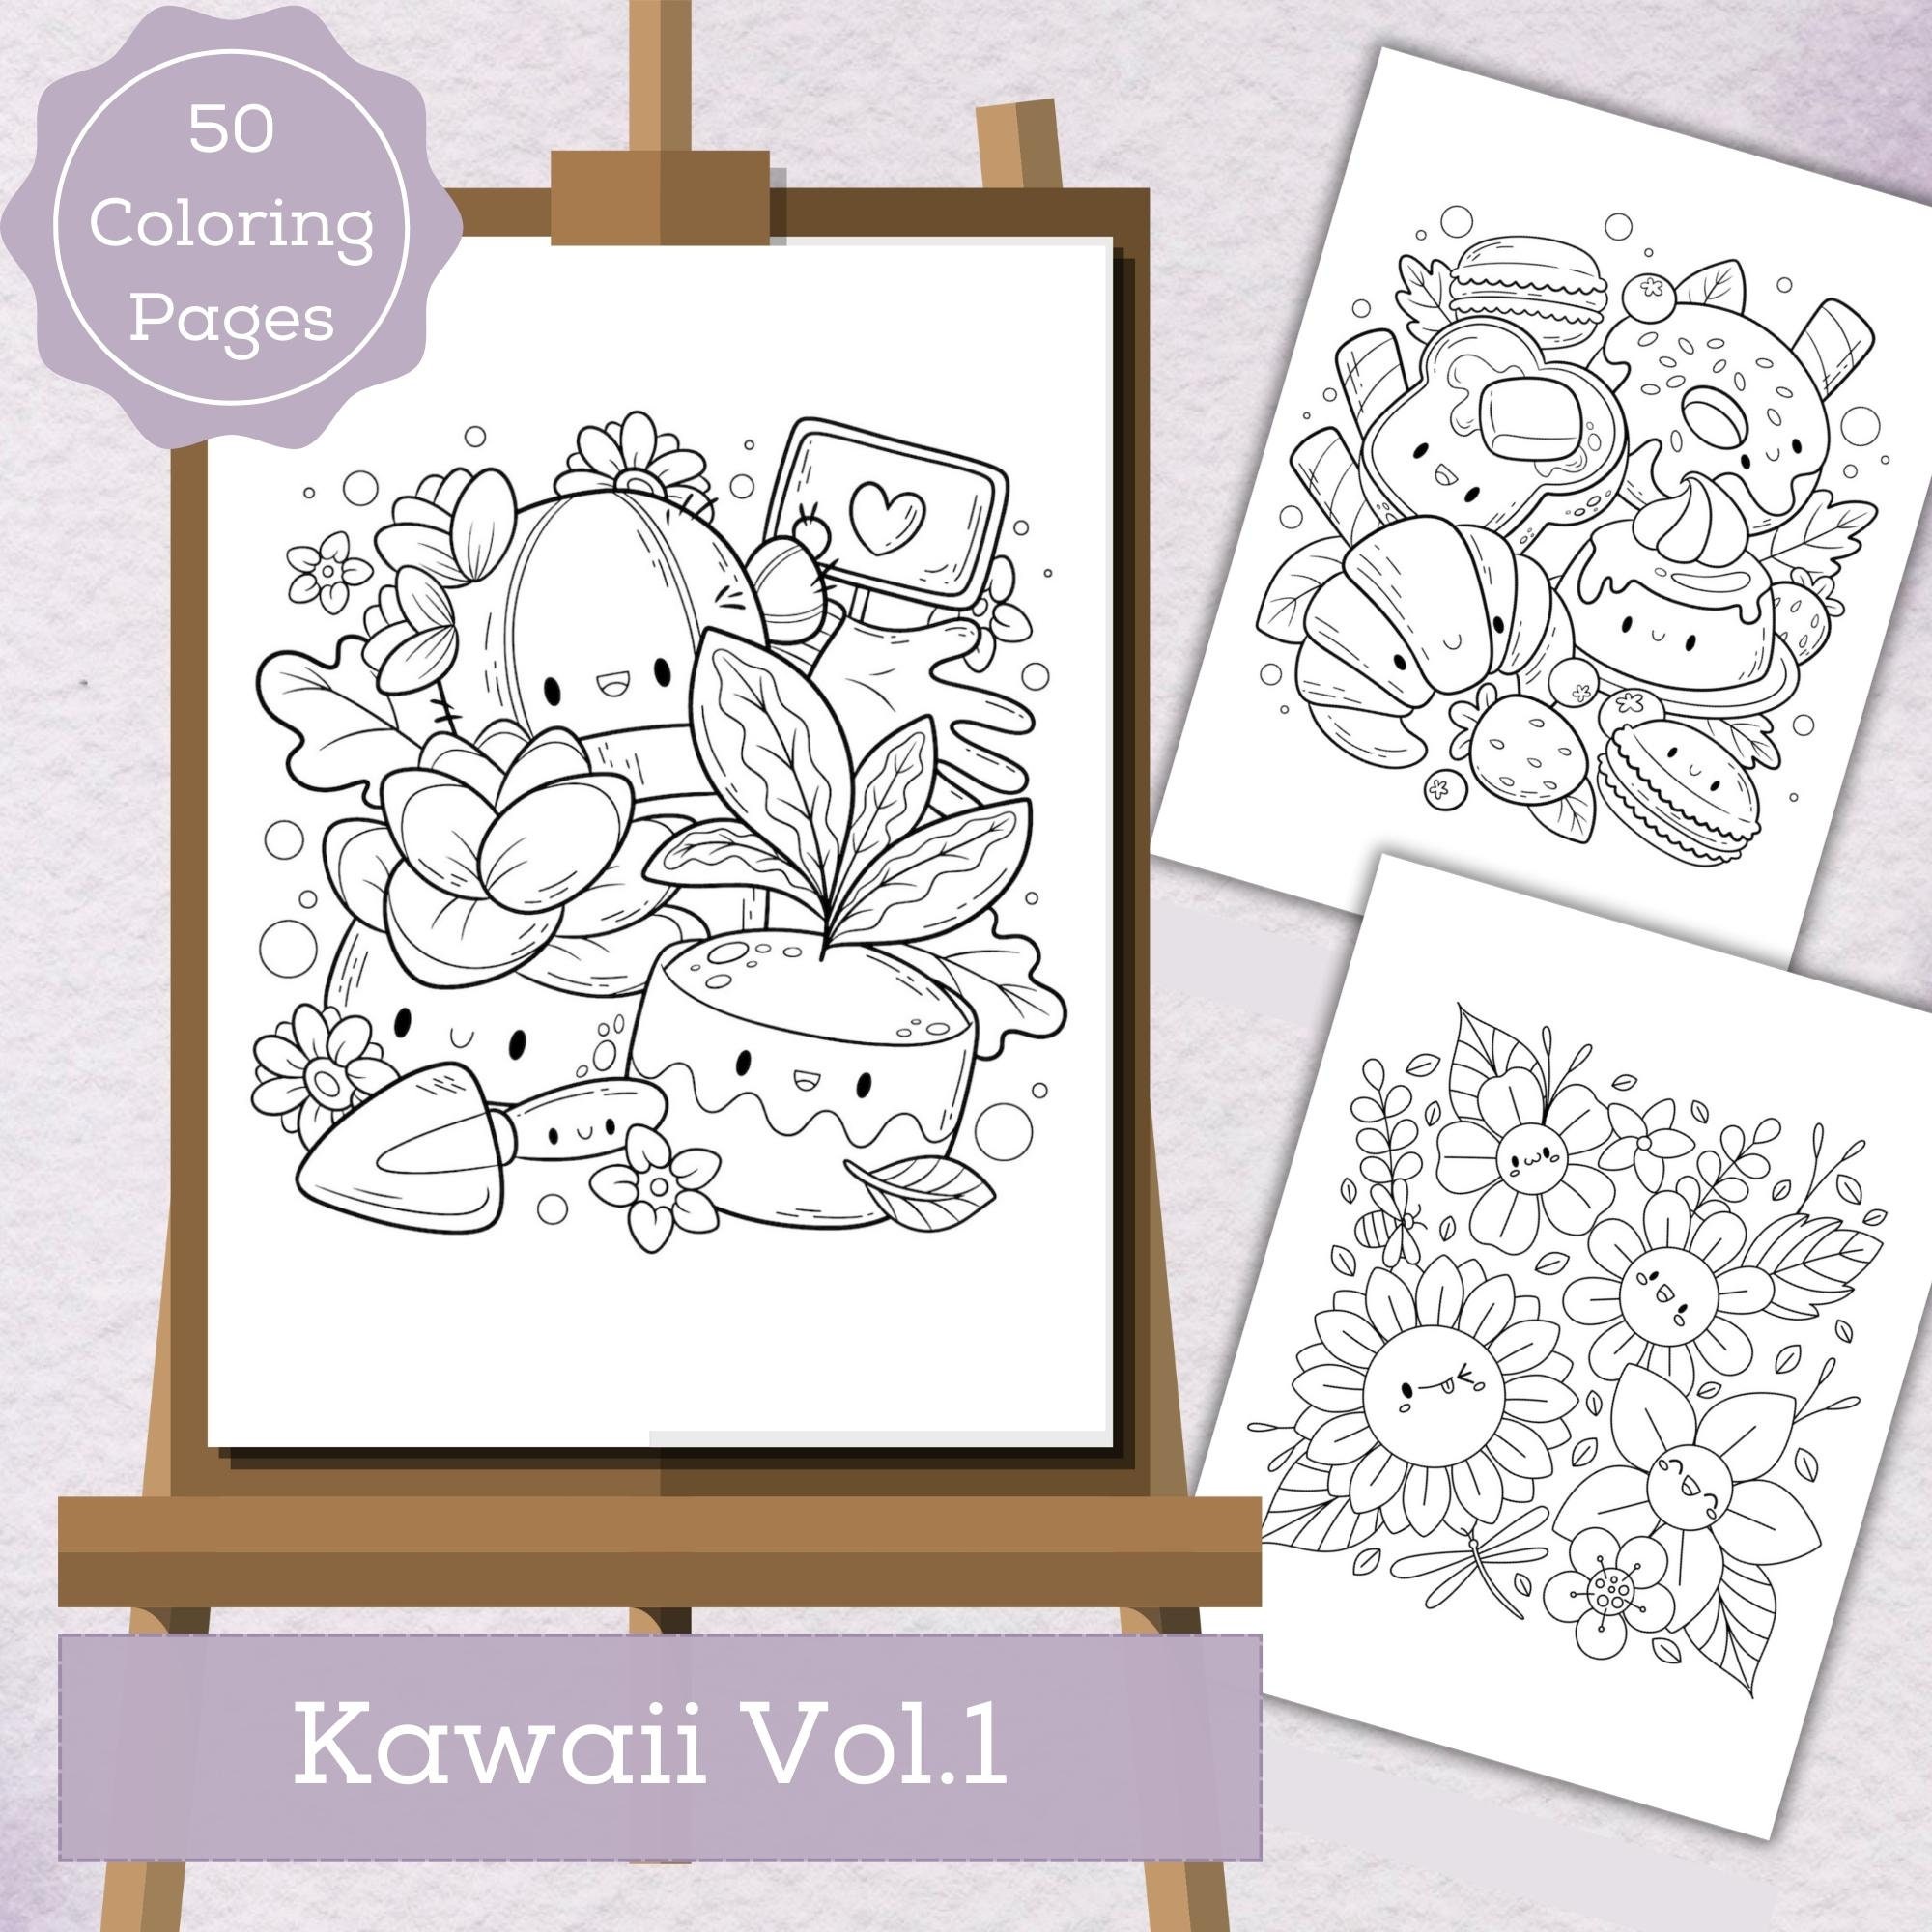 Kawaii Coloring Pages / Cute Coloring Set / Donut Cupcake Ice Cream Candy  Theme / PDF Download / Digital Coloring Bundle 